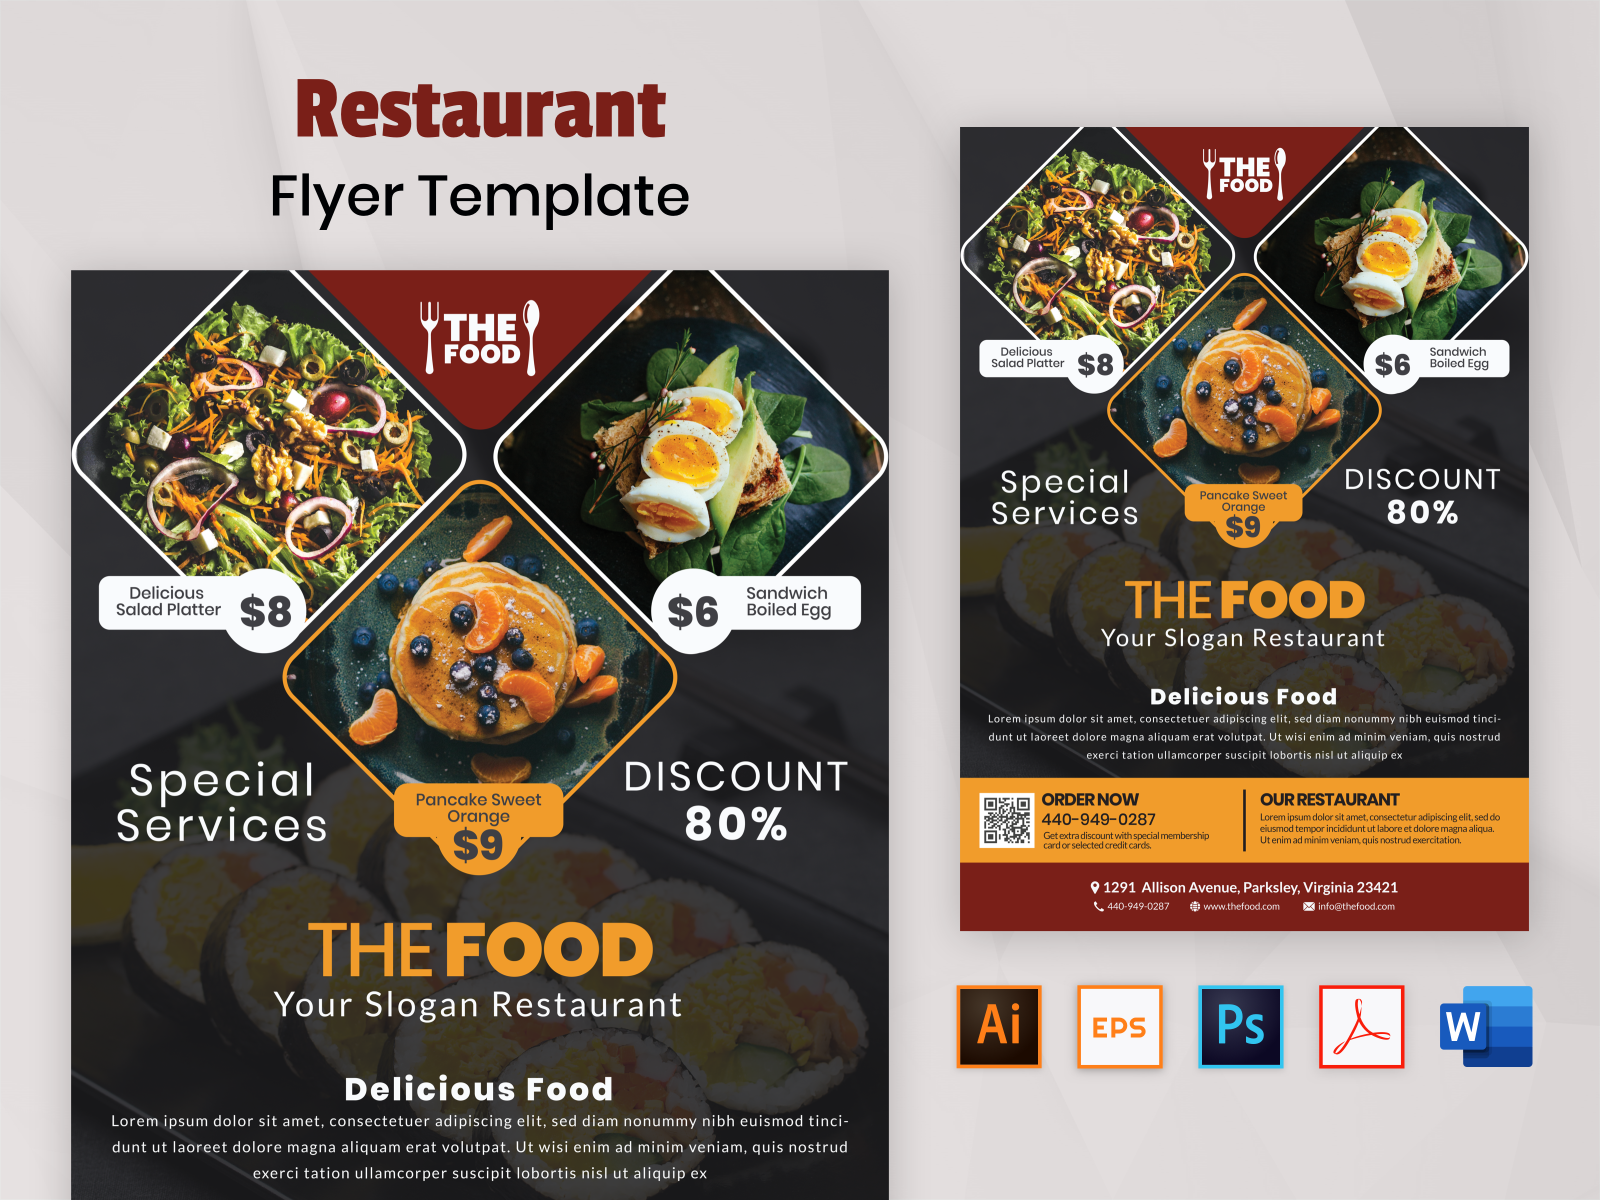 Restaurant Flyer Template By Hasanul Fauzie On Dribbble